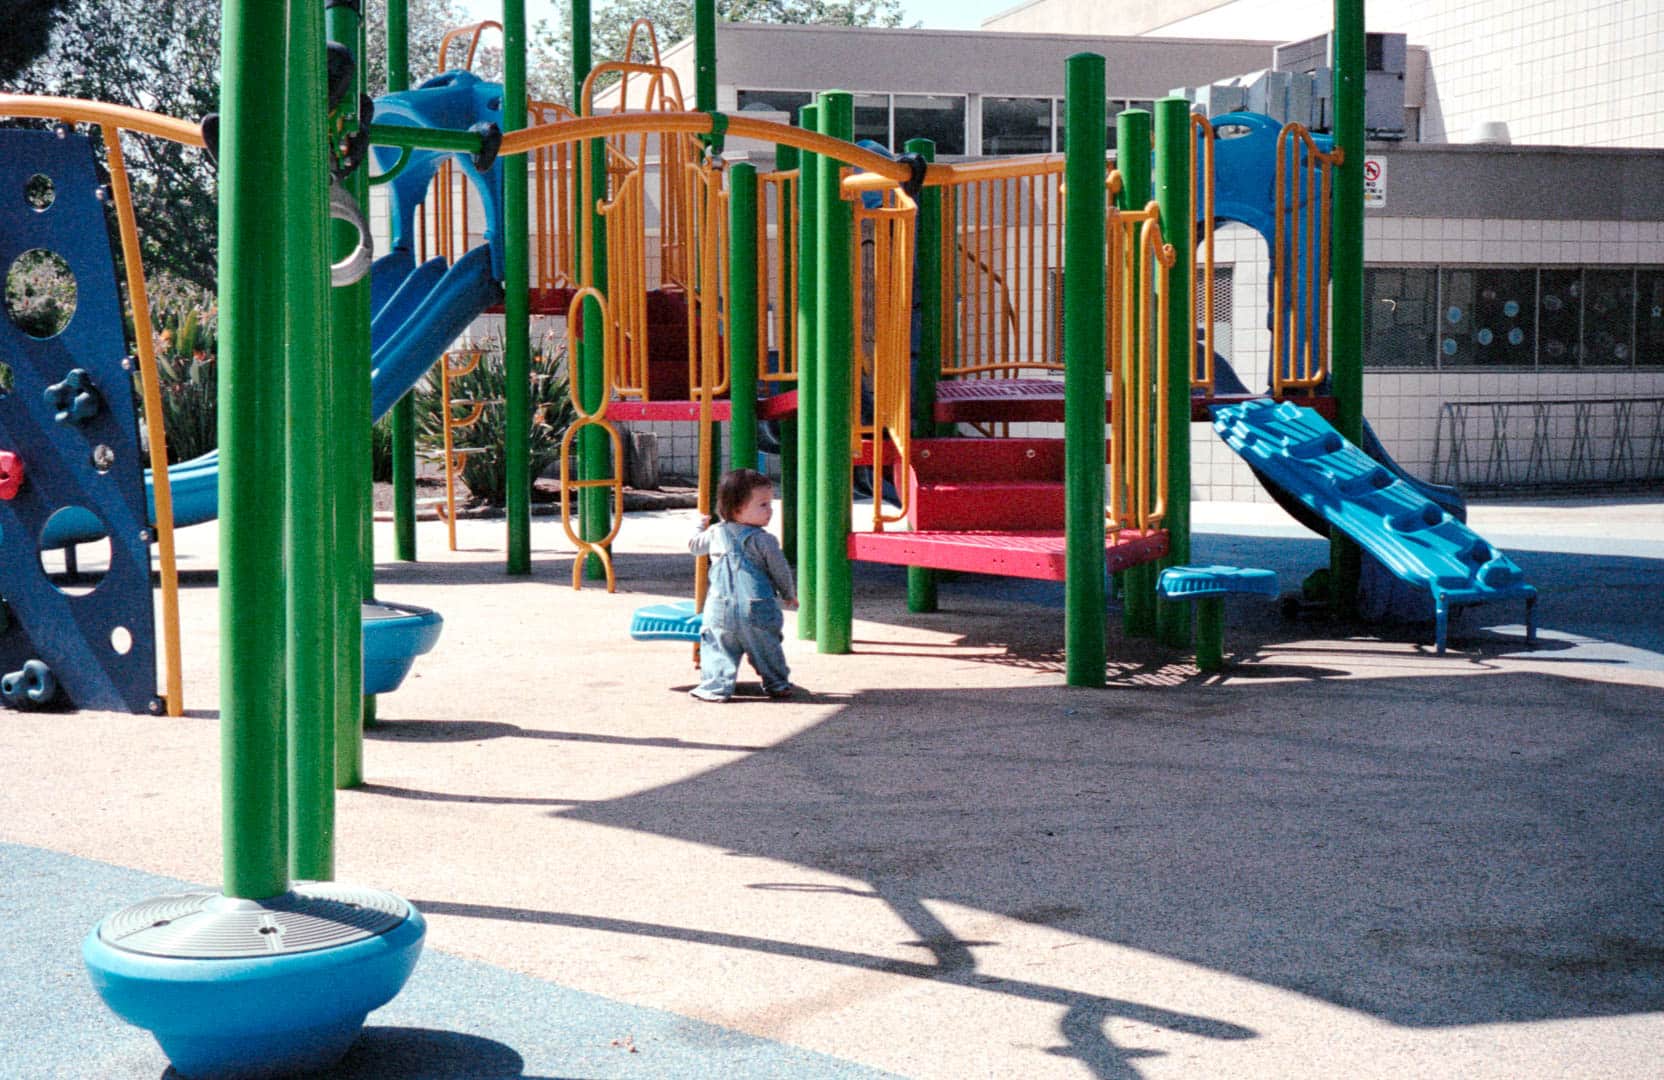 A young toddler standing in the middle of a largely empty playground